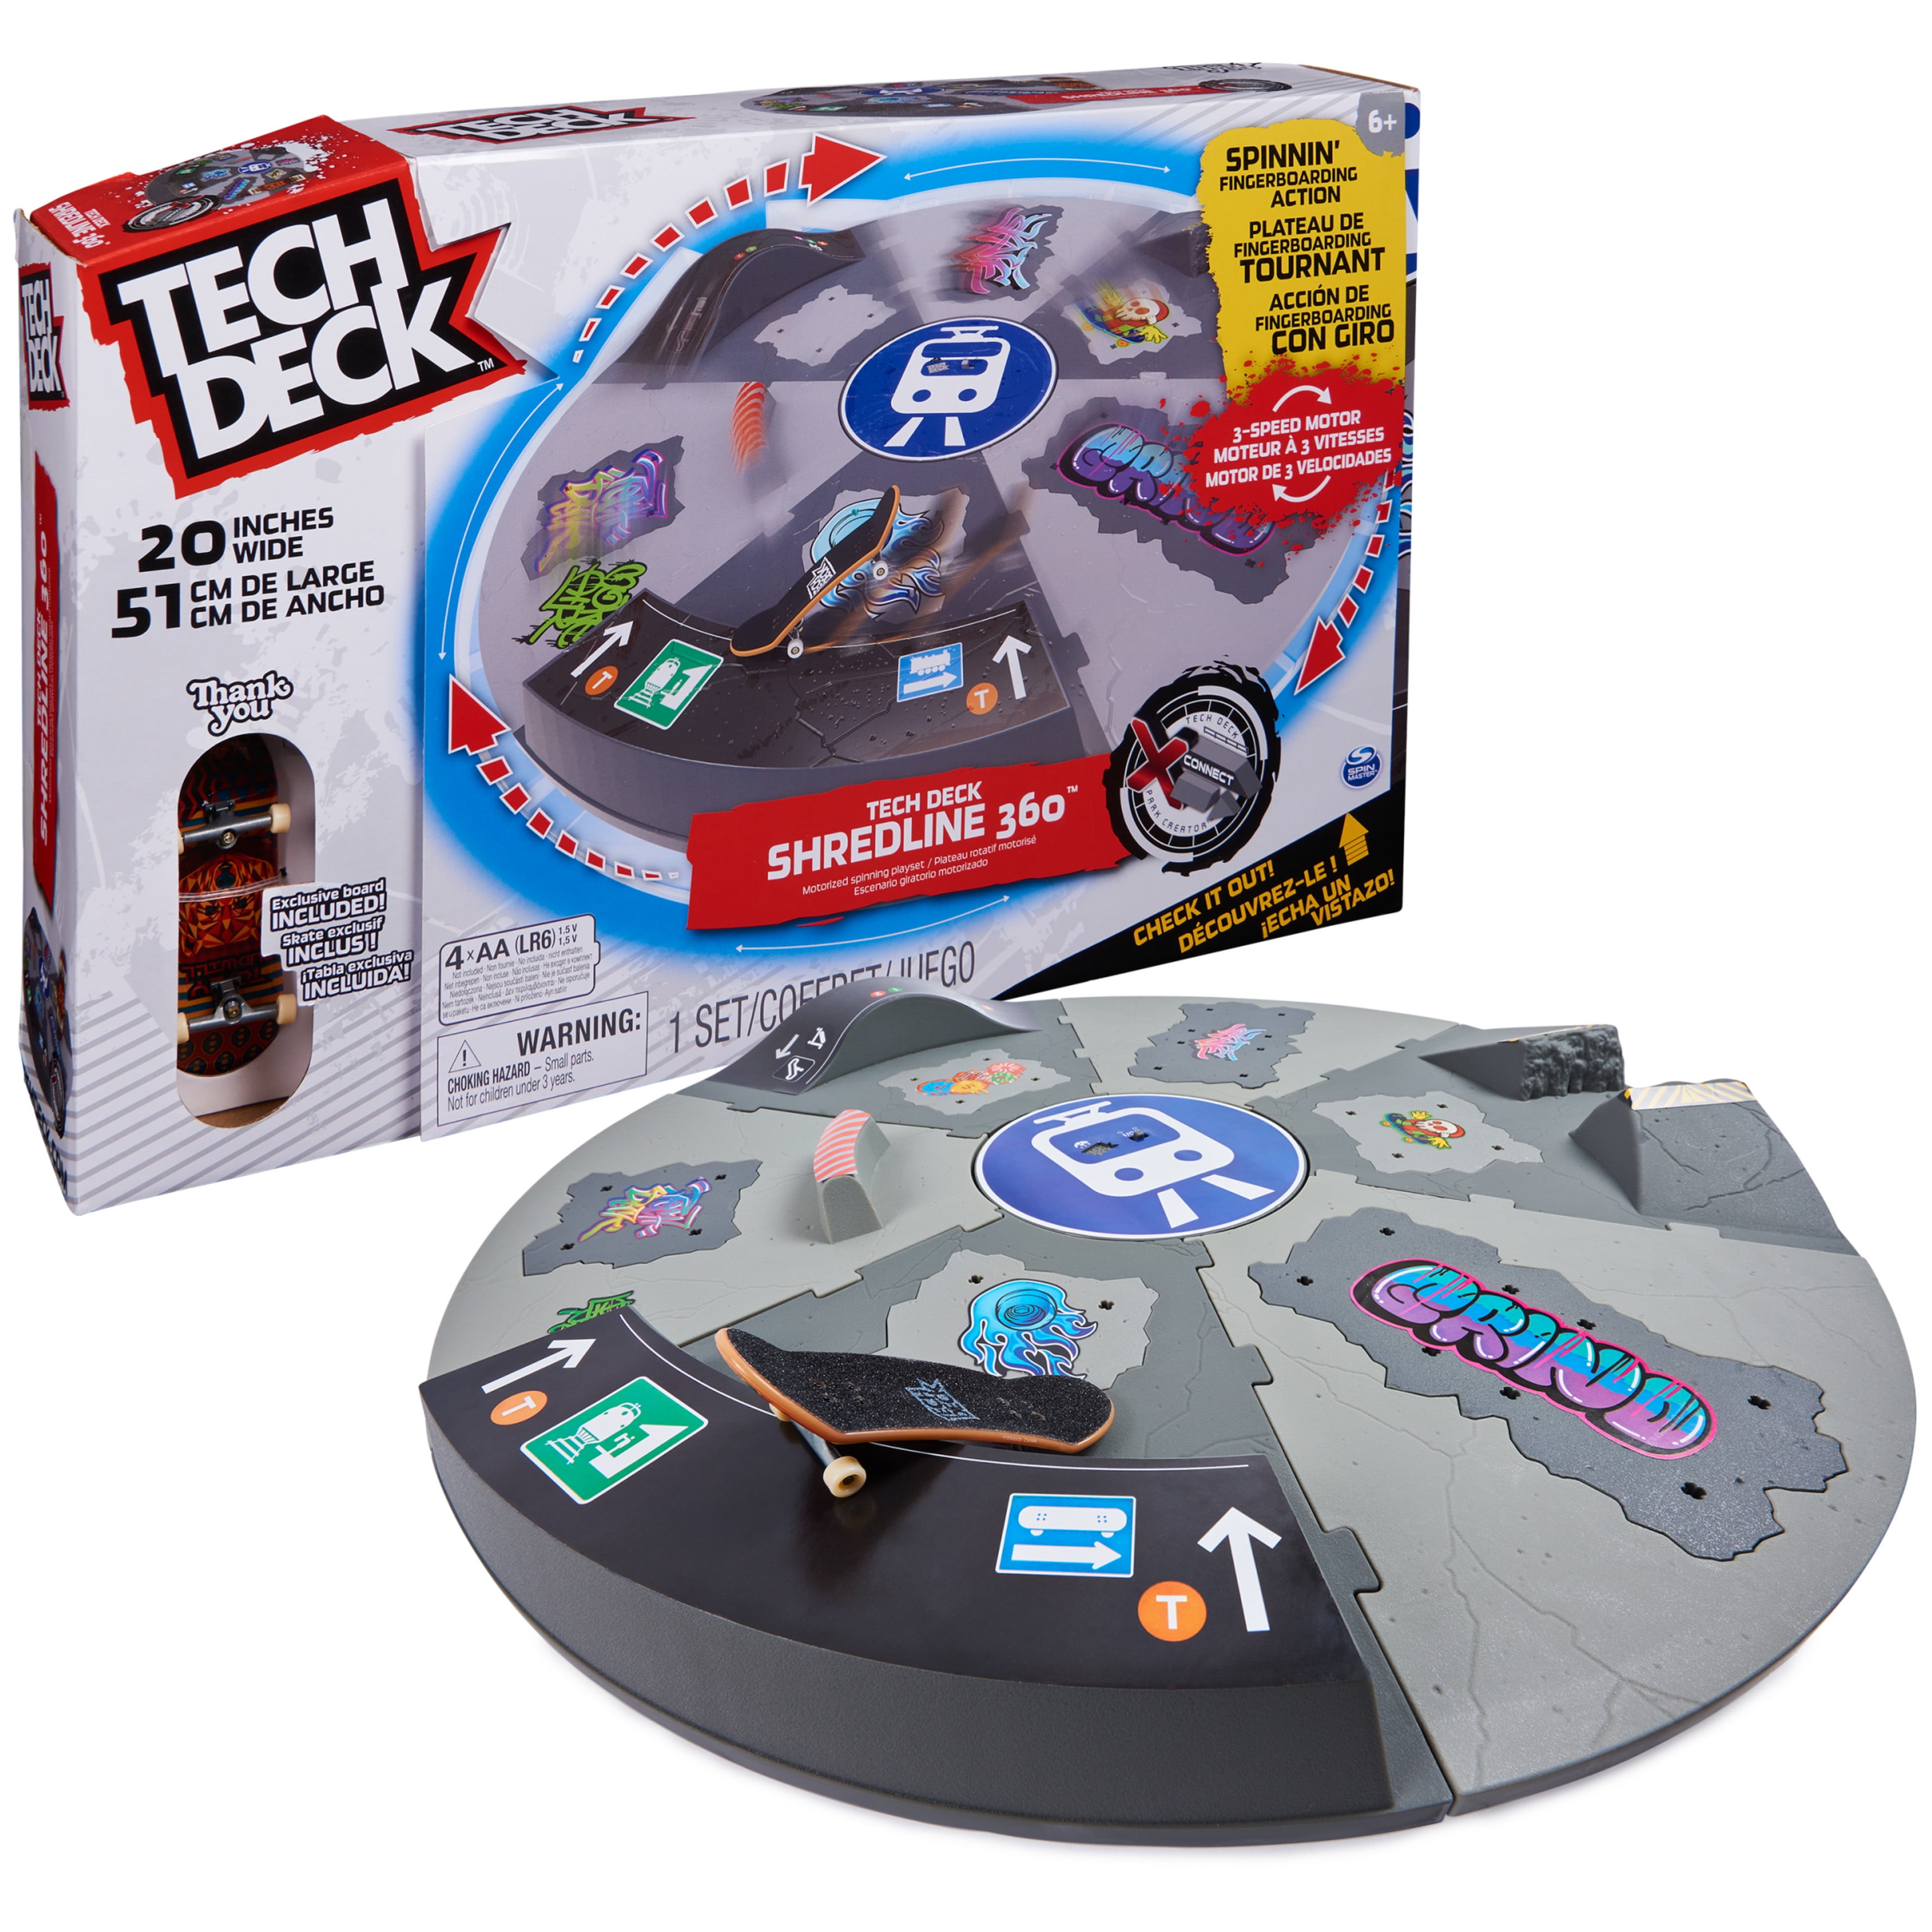 Tech Deck, Sk8 Garage X-Connect Park Creator, Customizable and Buildable  Ramp Set with Exclusive Fingerboard, Kids Toy for Boys and Girls Ages 6 and